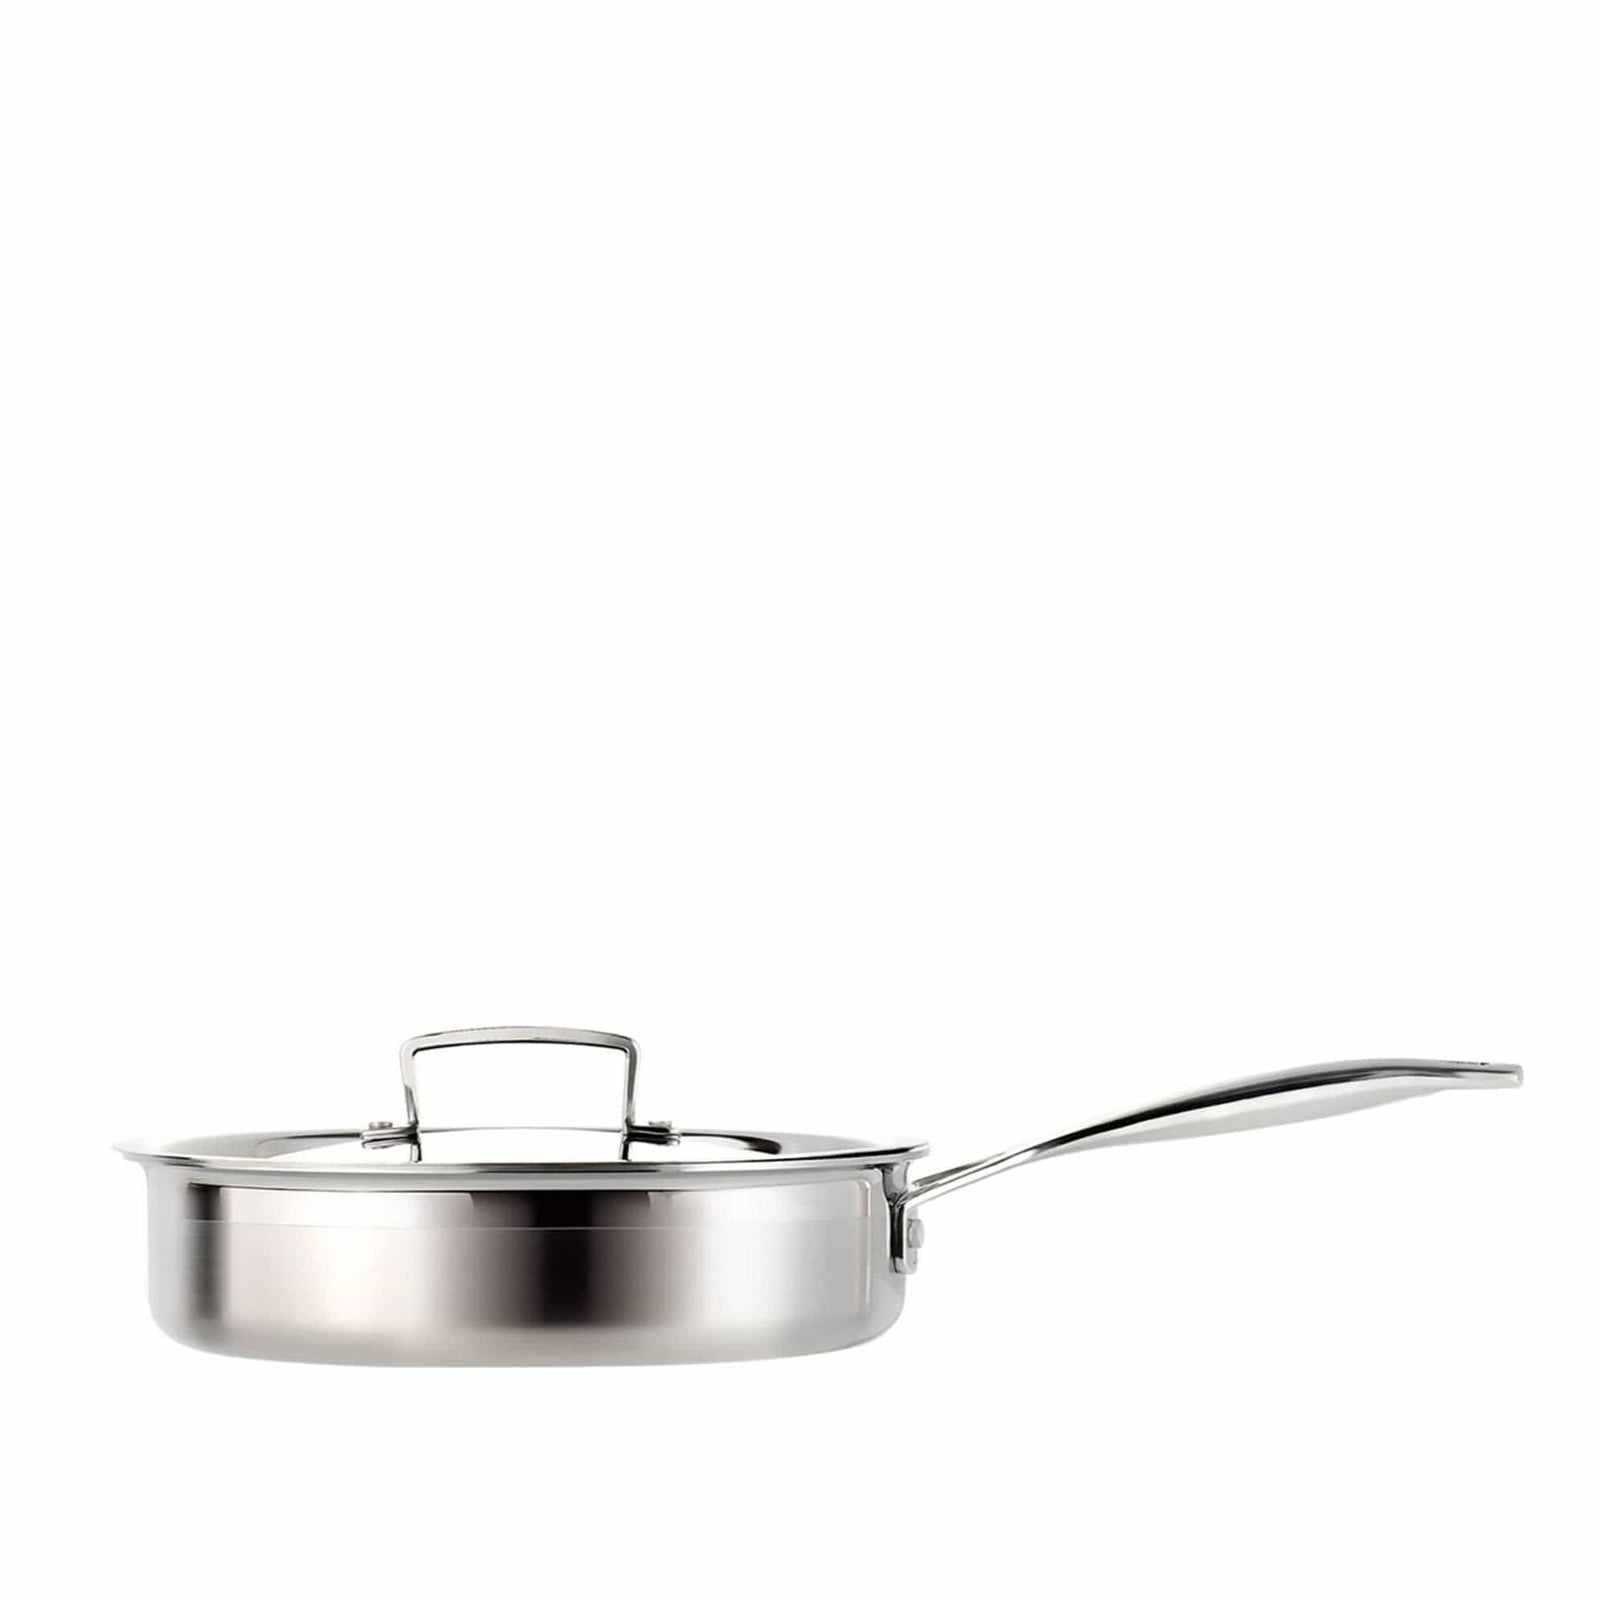 Le Creuset 3-PLY Stainless Steel 24cm Sauté Pan with Lid